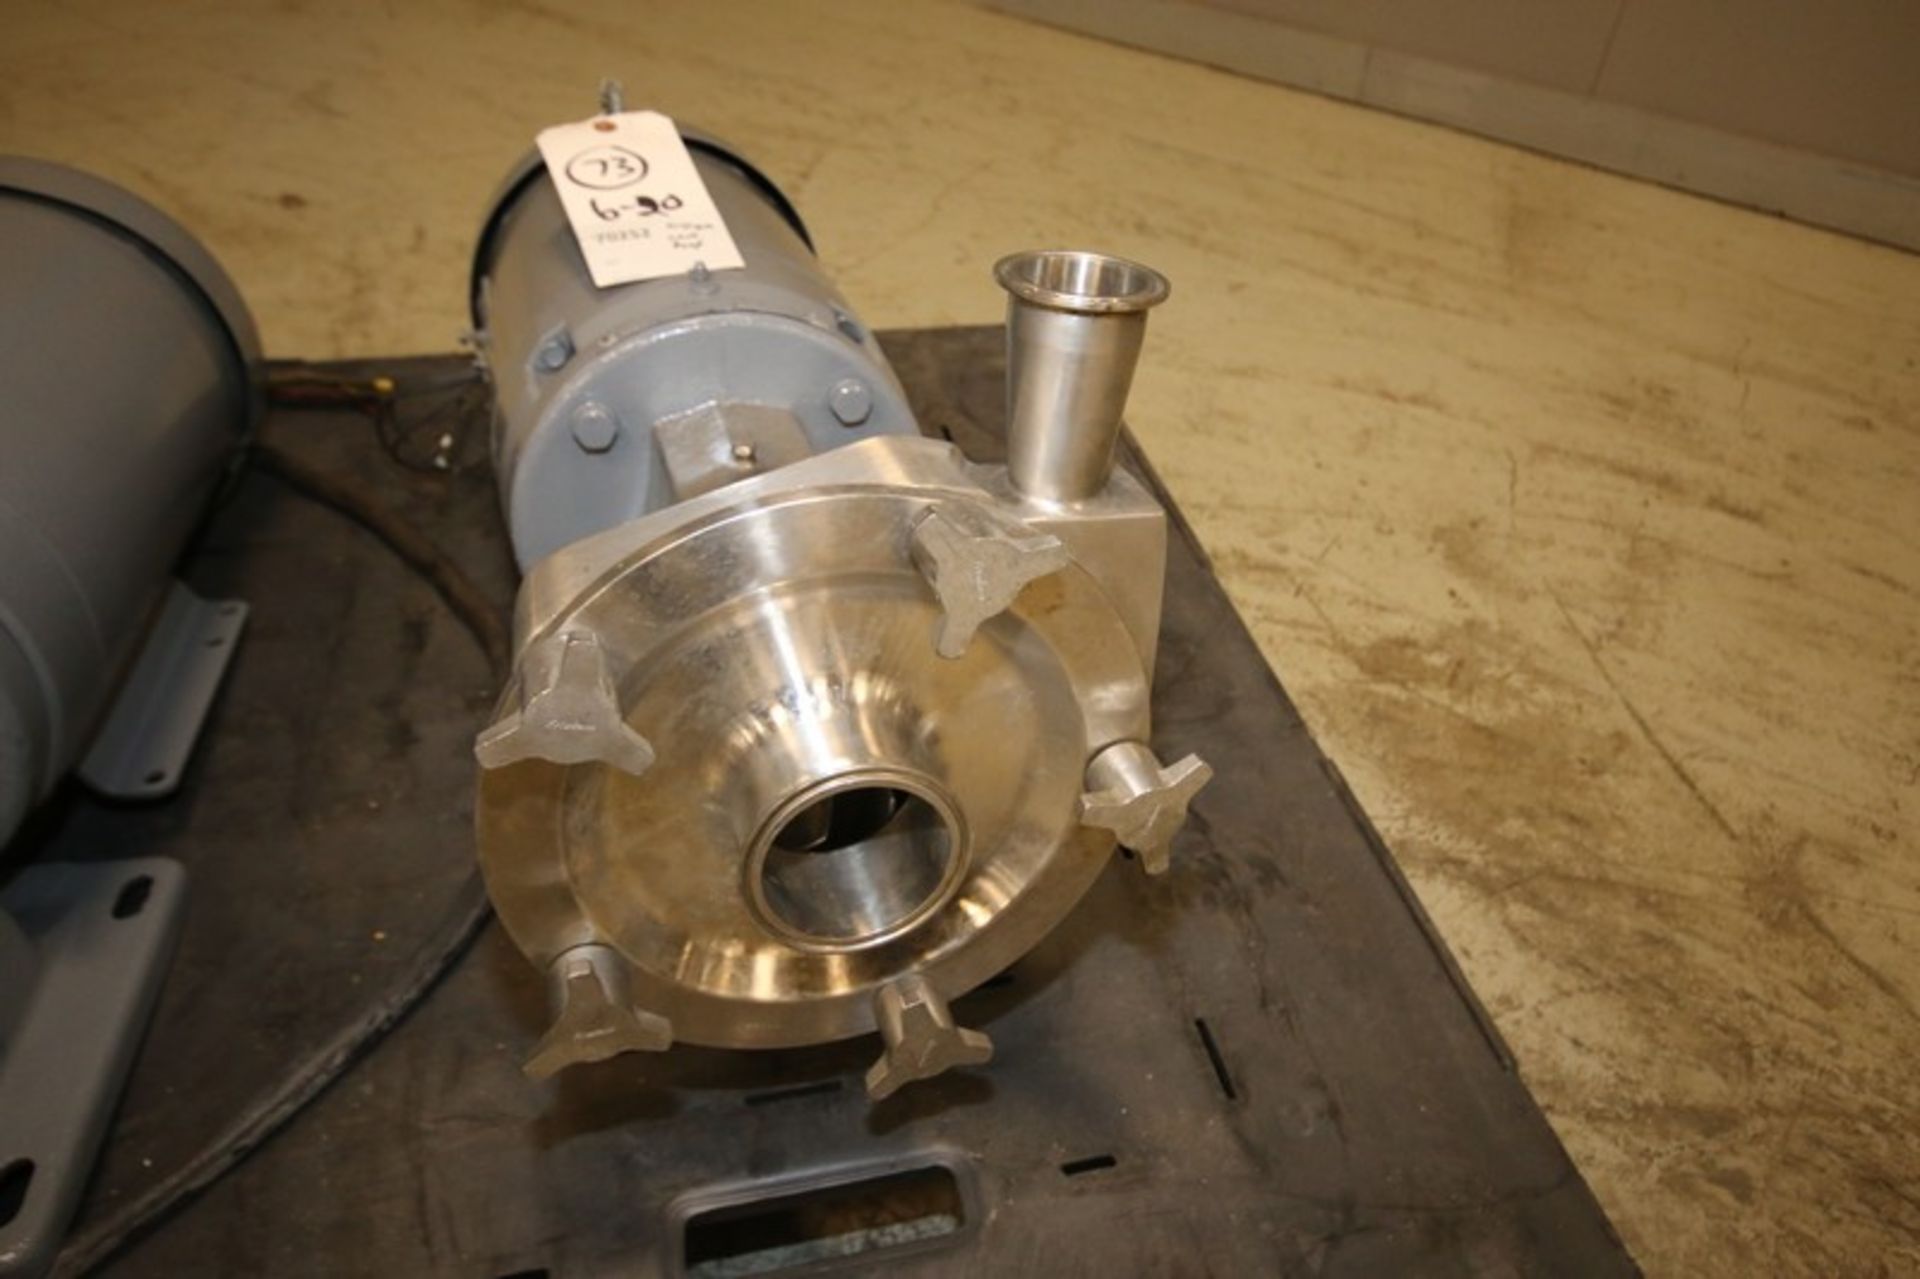 Fristam Aprox. 10 hp Centrifugal Pump, S/N FP17320203057, with Aprox. 2" x 3" Clamp Type Inlet/ - Image 2 of 3